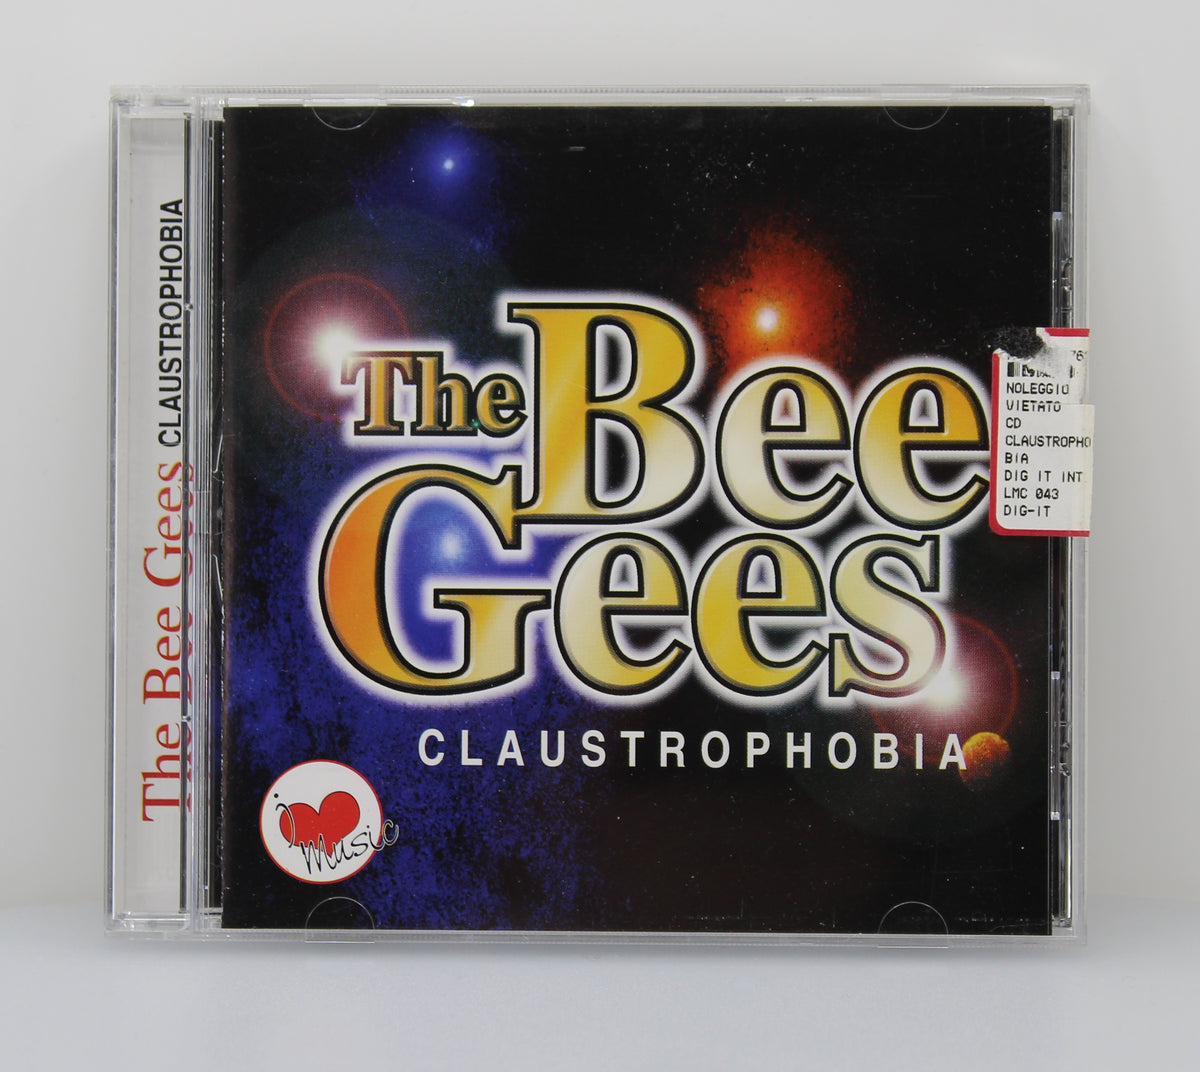 Bee Gees - Claustrophobia, CD, Italy 1996